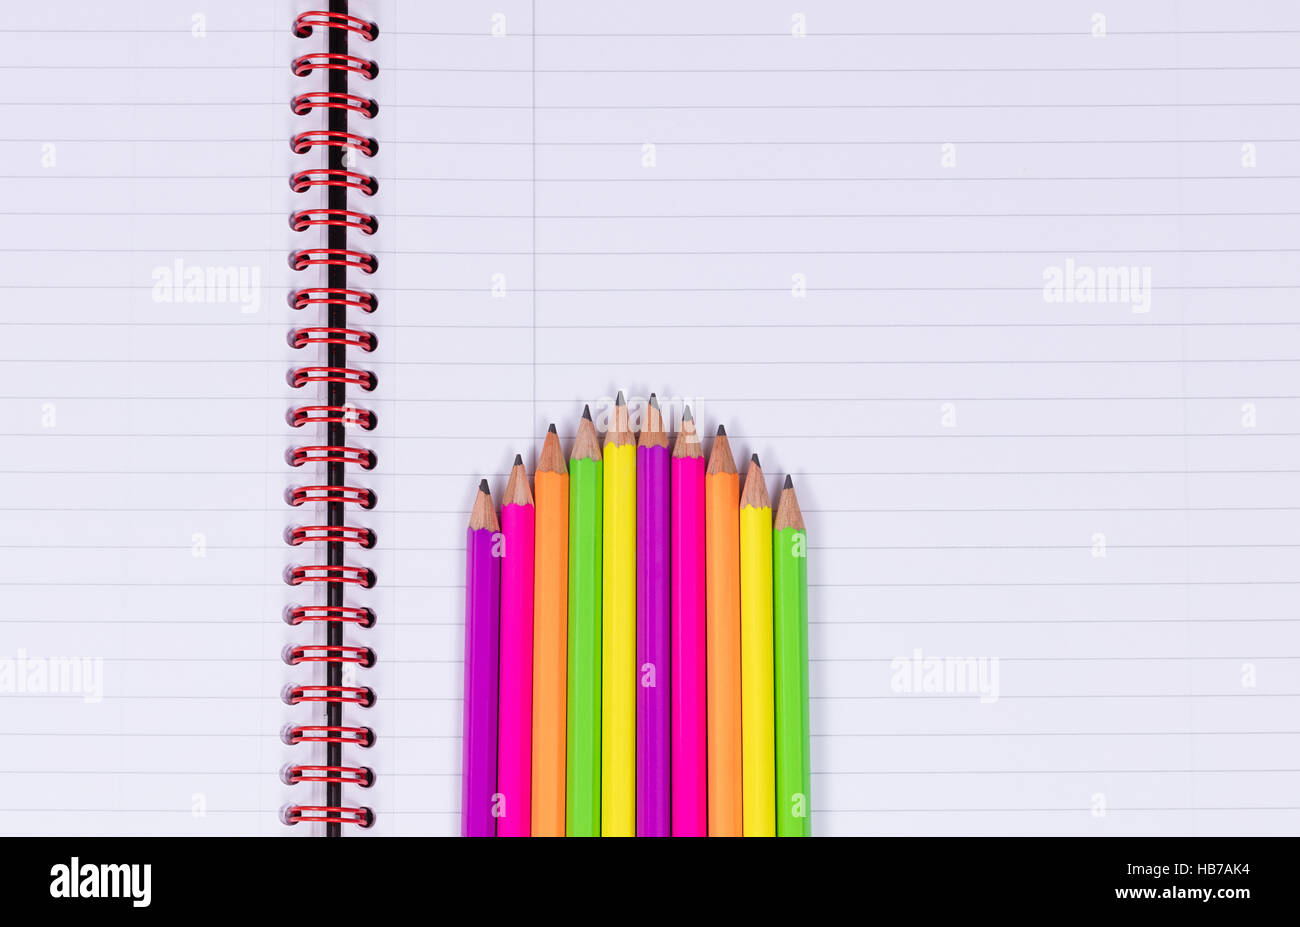 Pencil tips on a spiral notebook background Stock Photo